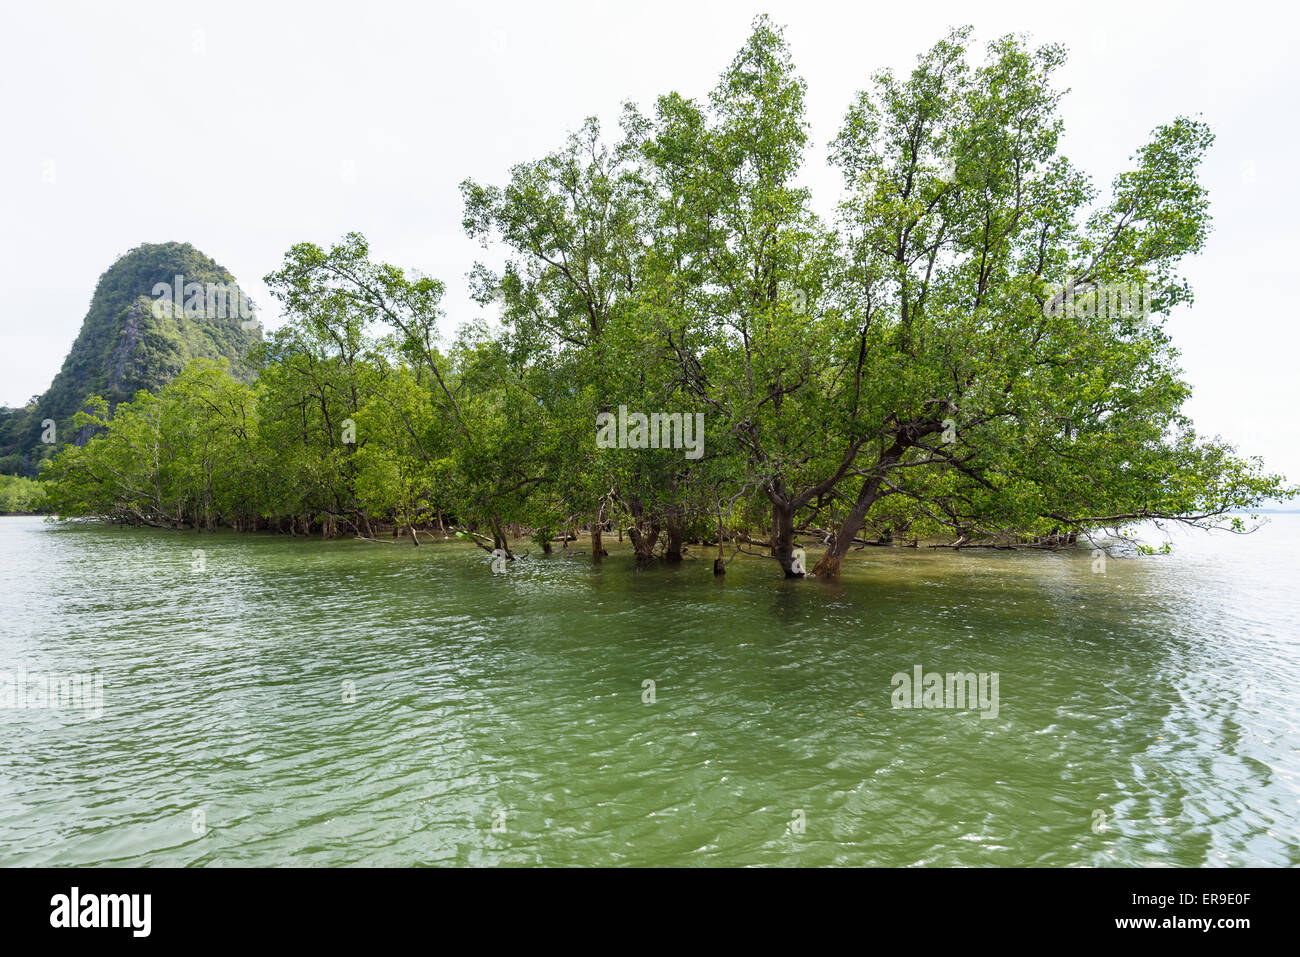 Avicennia officinalis is a tree species of mangrove depend on water at sea in Phang Nga Bay or Ao Phang Nga National Park, Thail Stock Photo